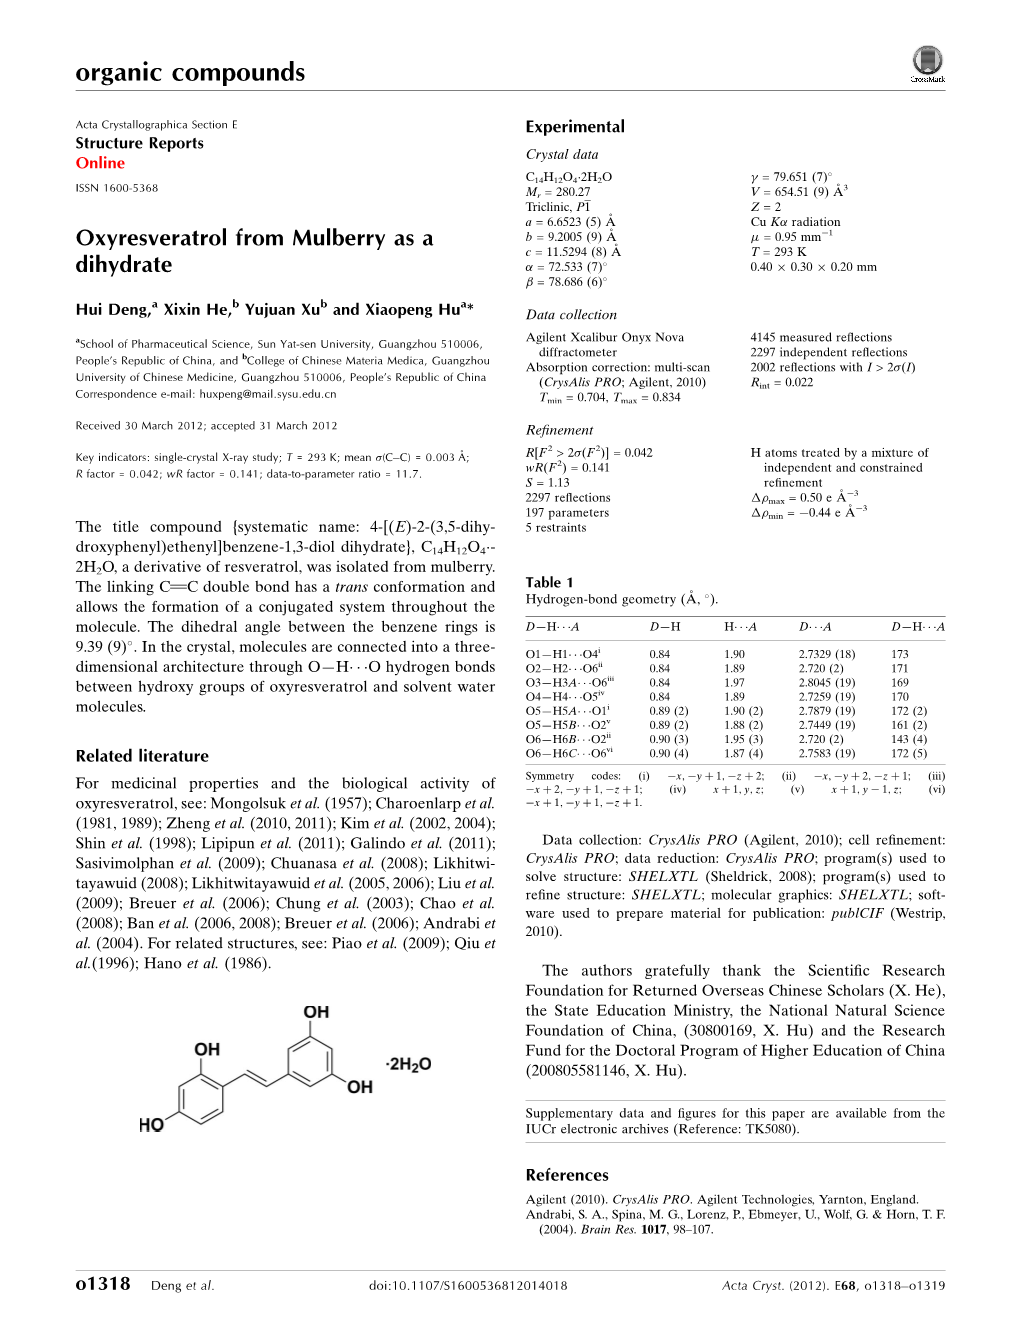 Oxyresveratrol from Mulberry As a Dihydrate